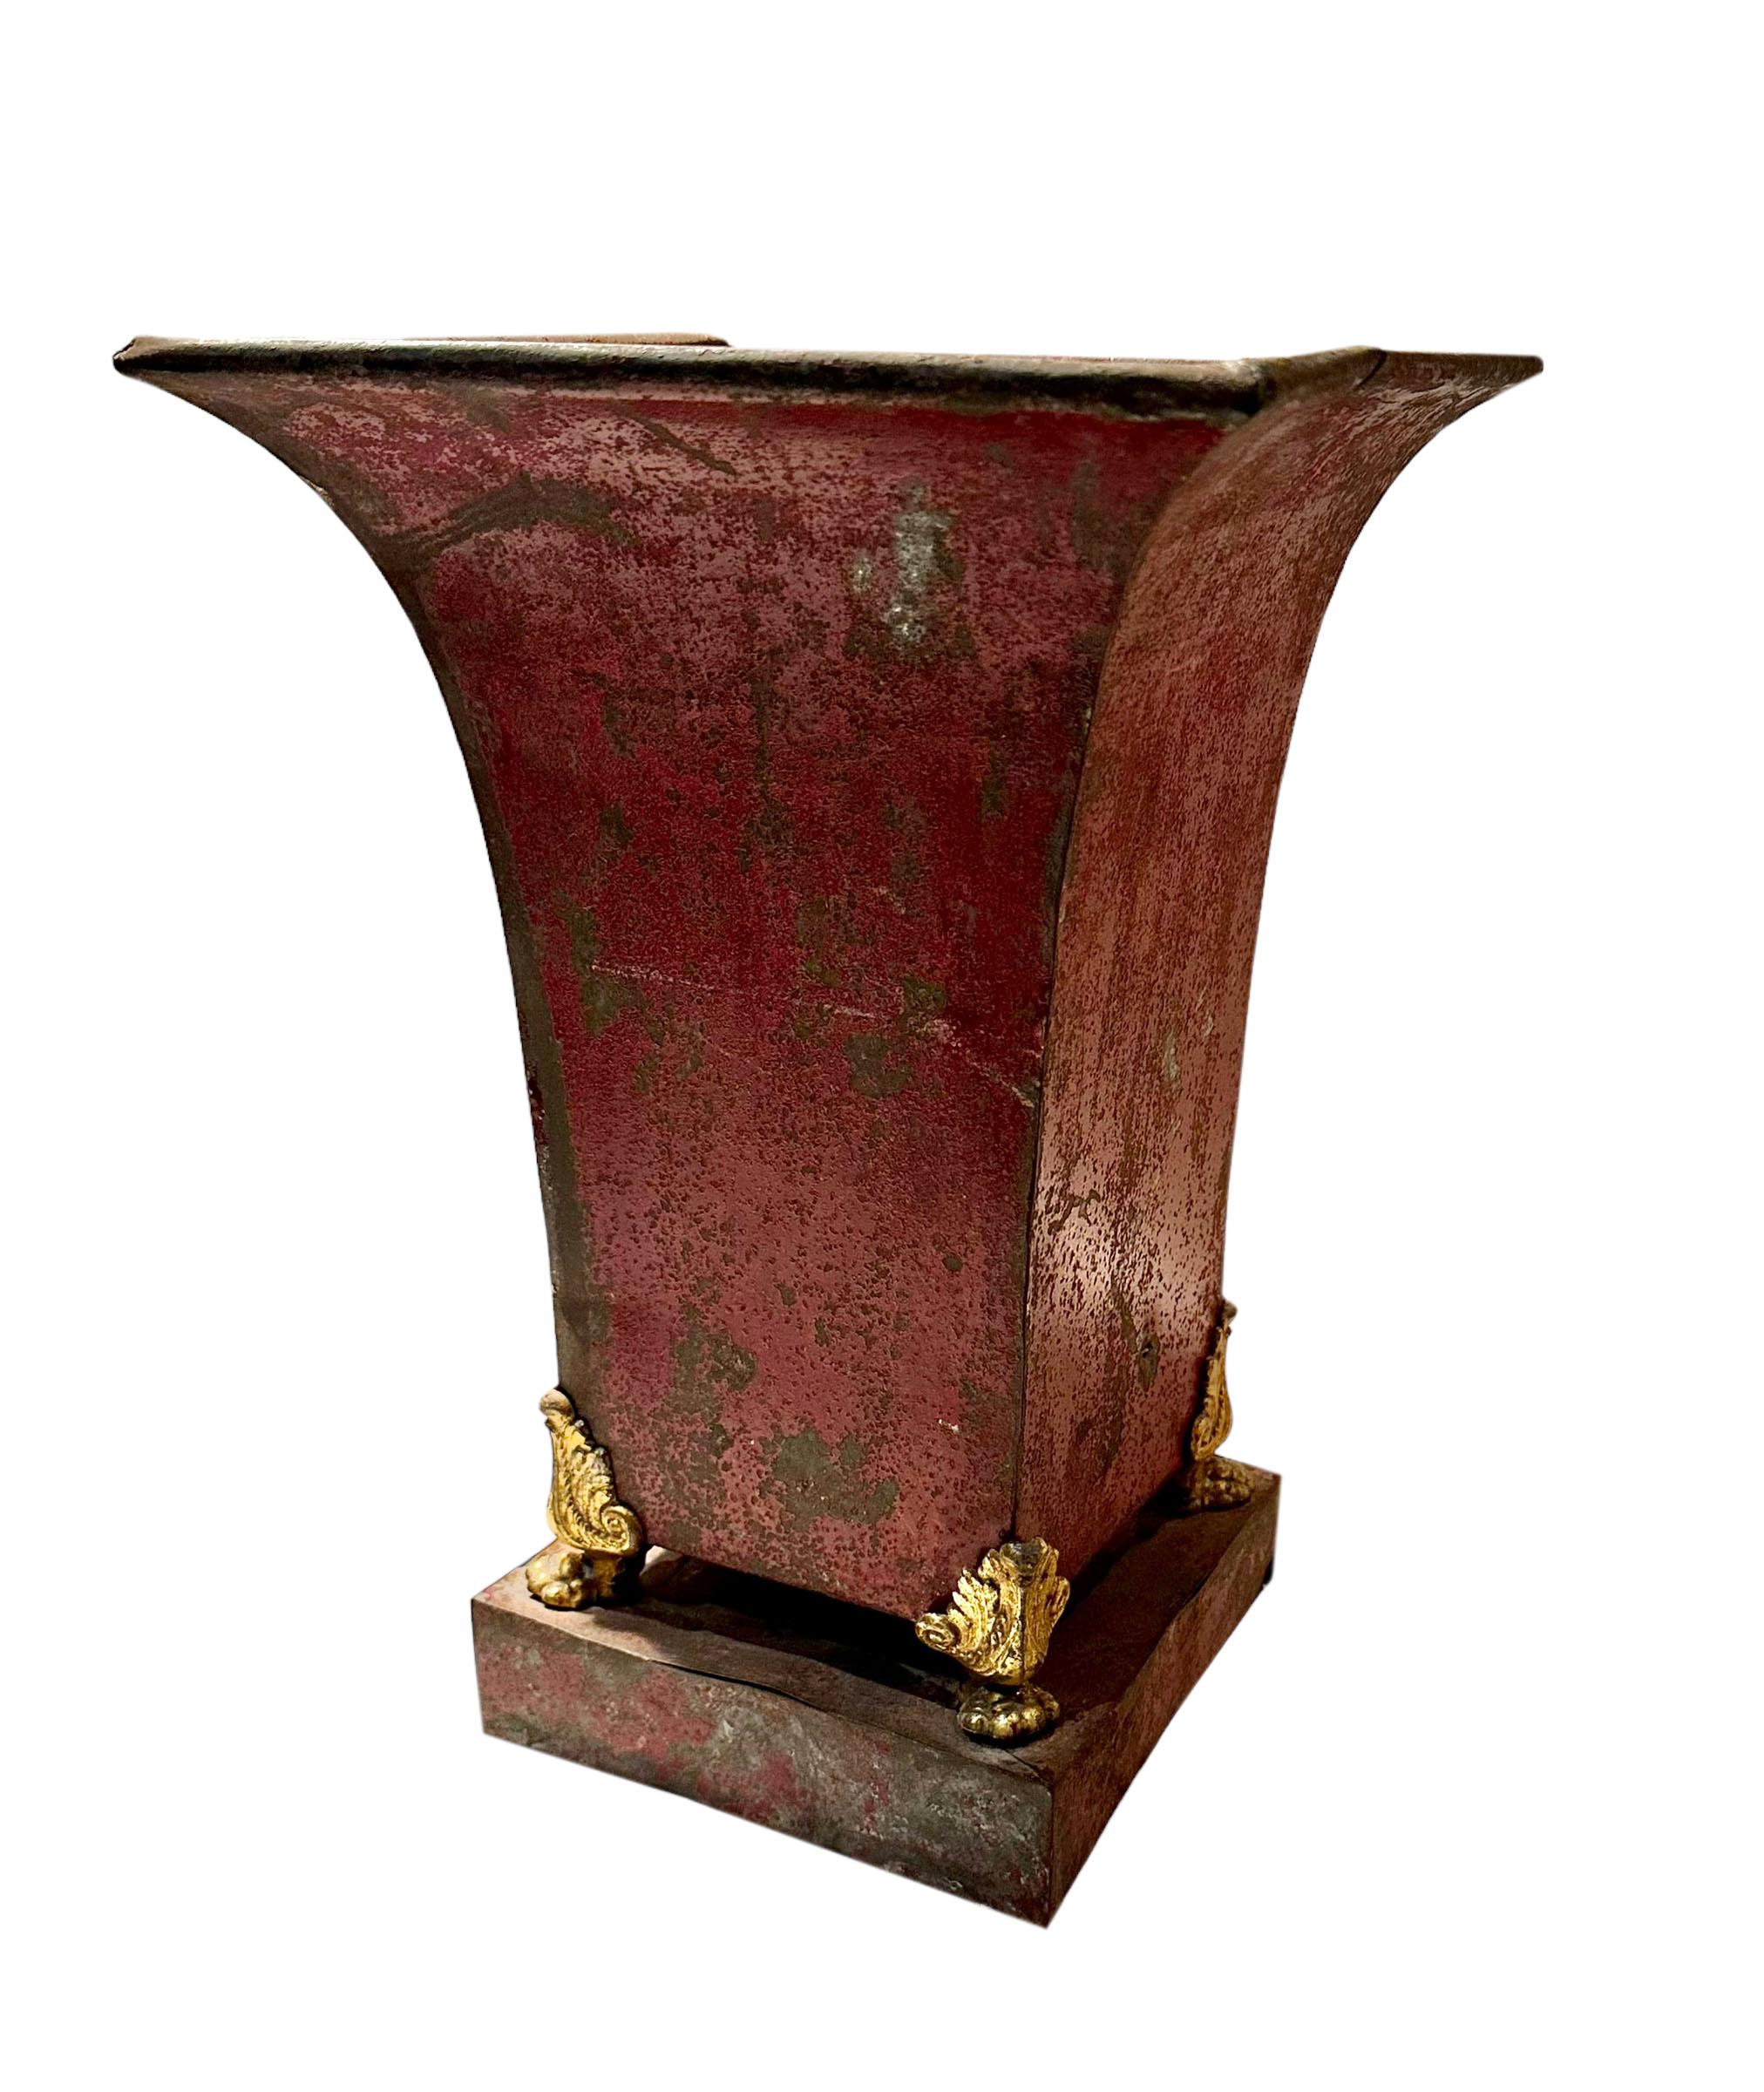 An original red color tole urn with bronze lions feet. Has a lot of patina with some condition issues but looks sensational anyway. The damage does not affect it it has a lot of charm the way it is. Early 19th century, French.